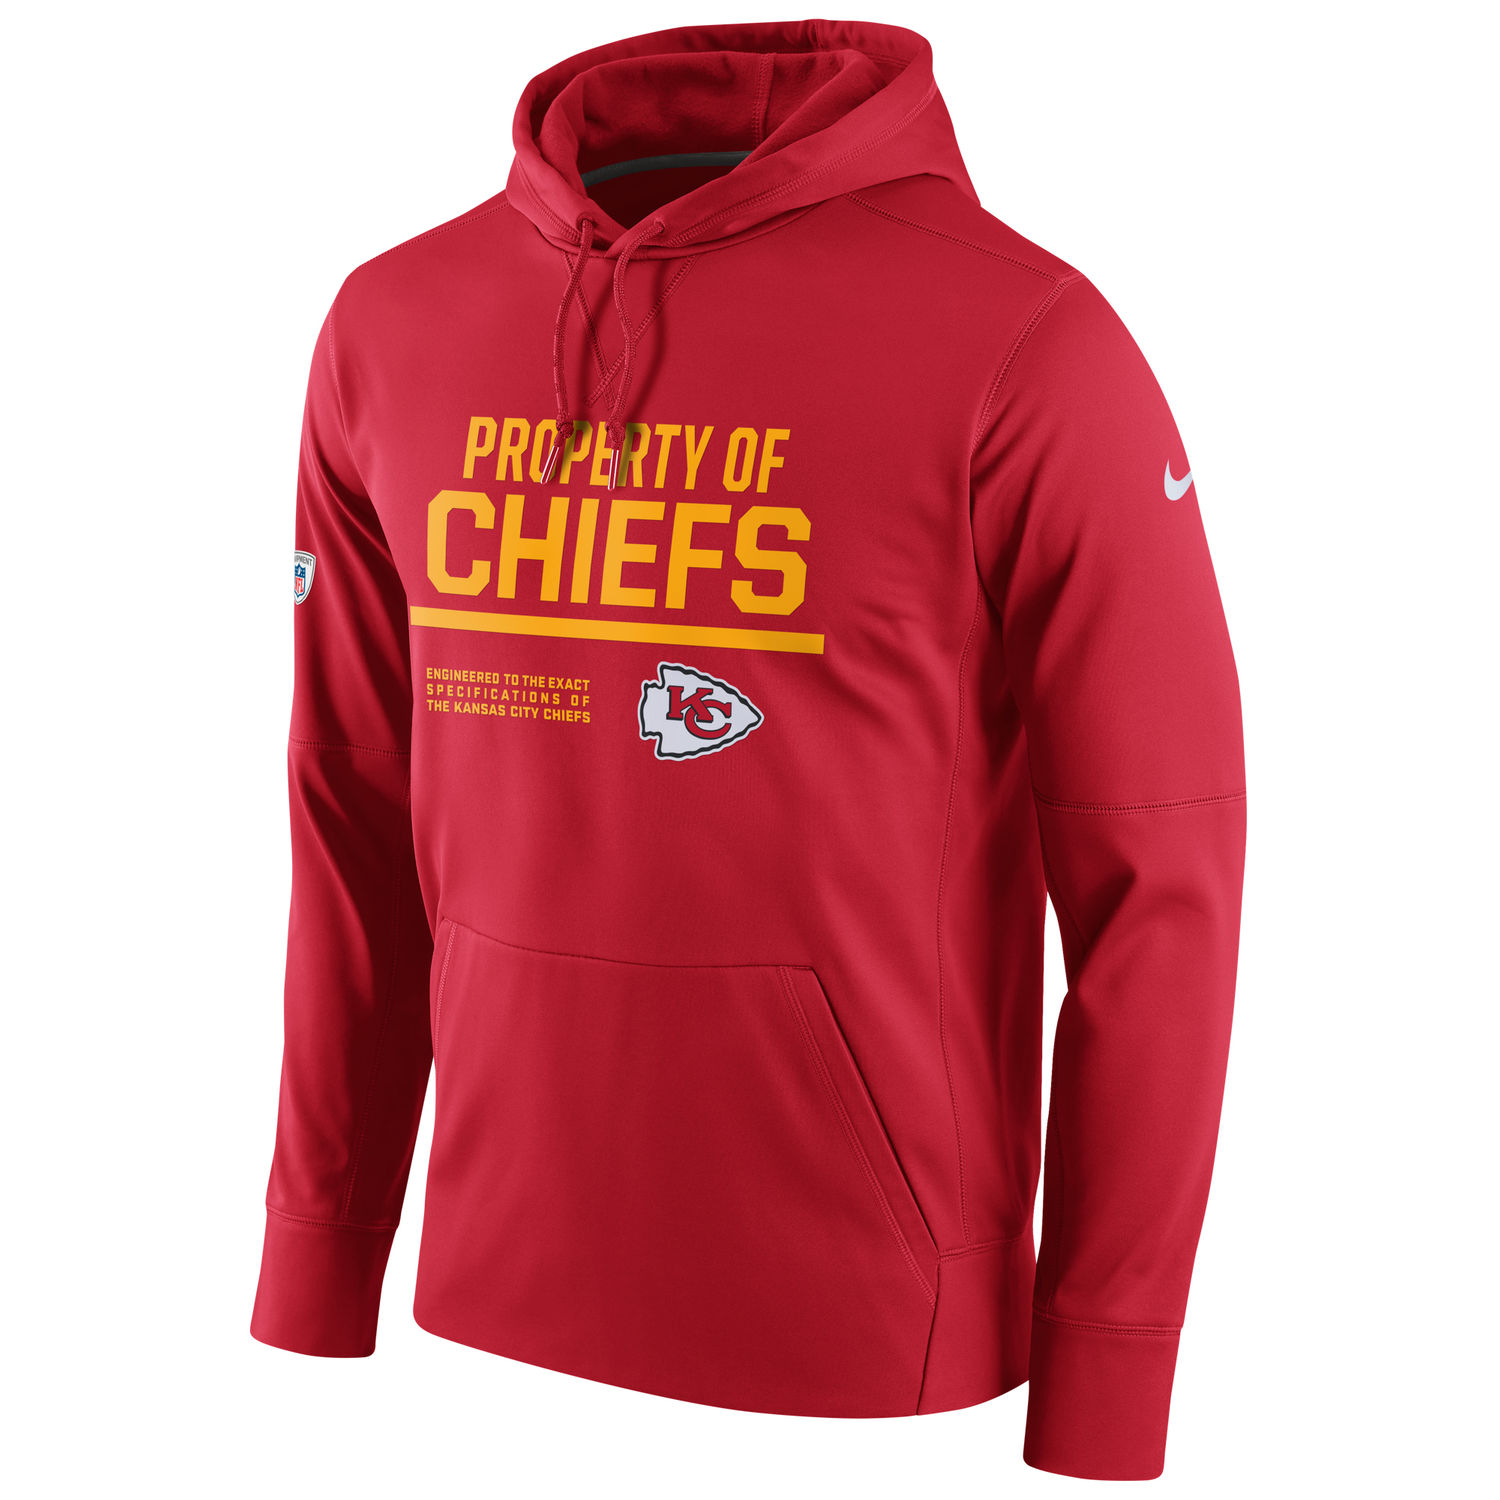 Mens Kansas City Chiefs Nike Red Circuit Property Of Performance Pullover Hoodie